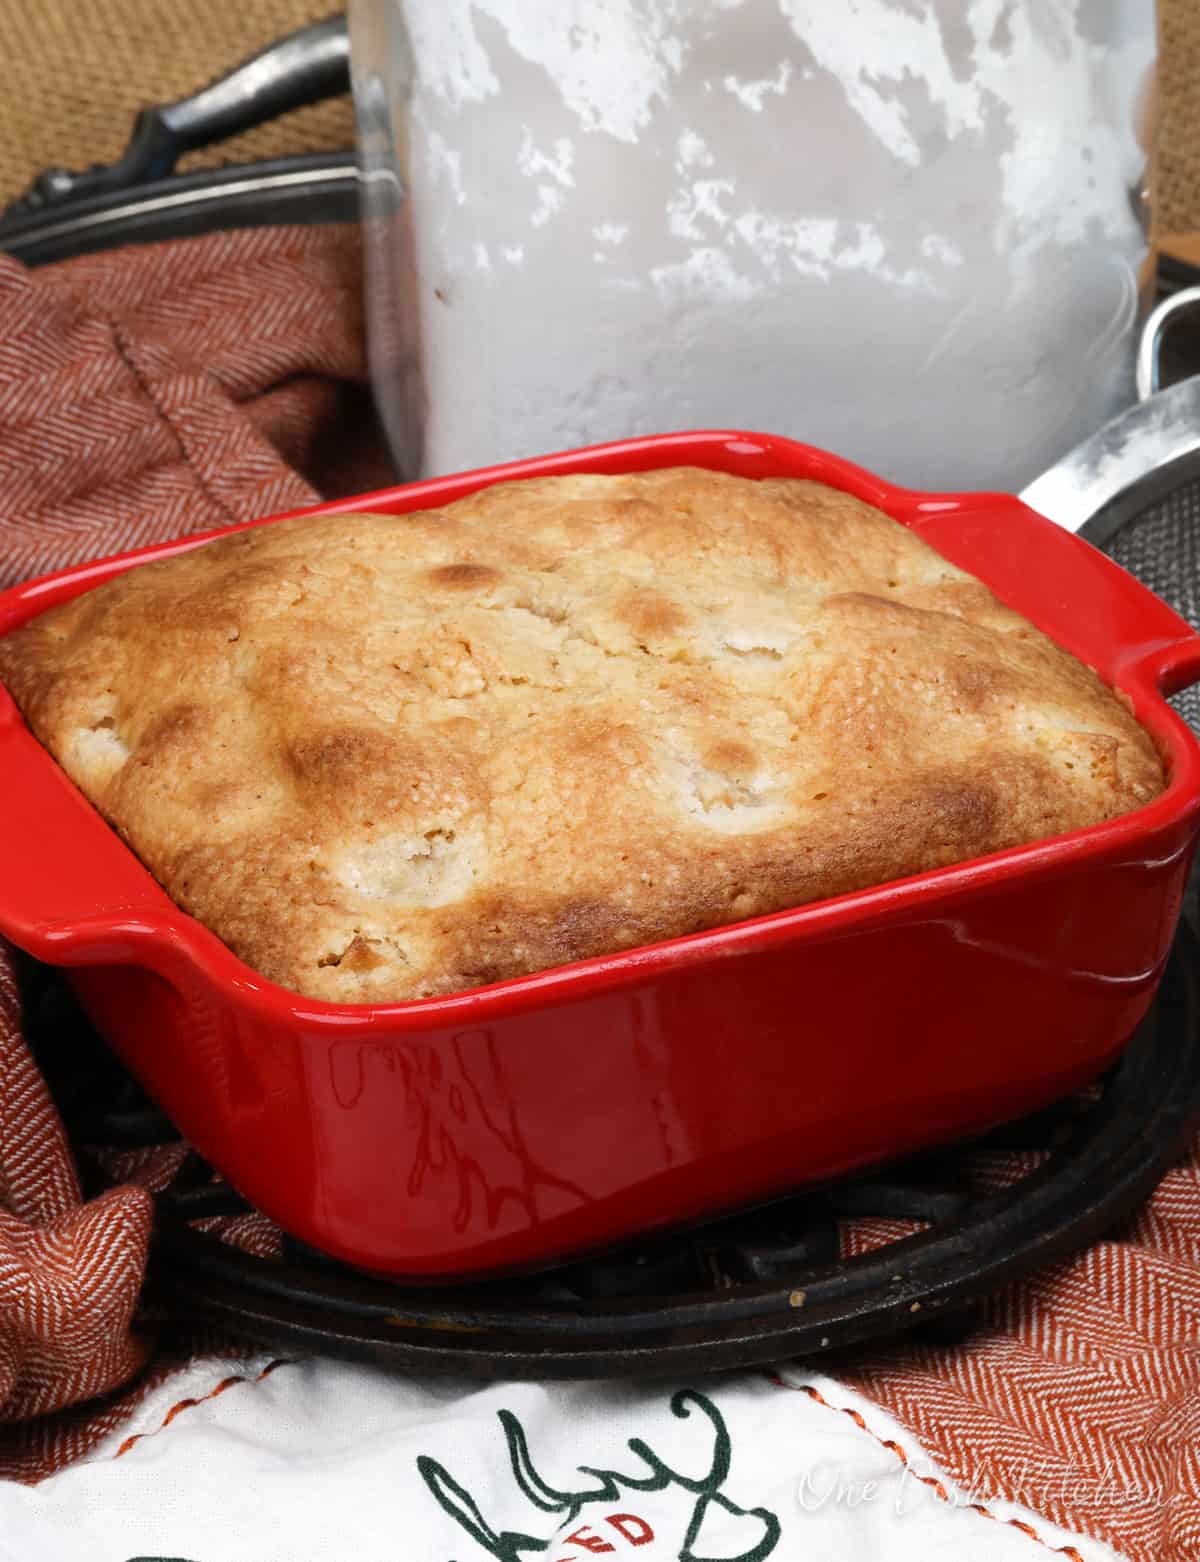 a small apple cake in a red baking dish on a silver tray.